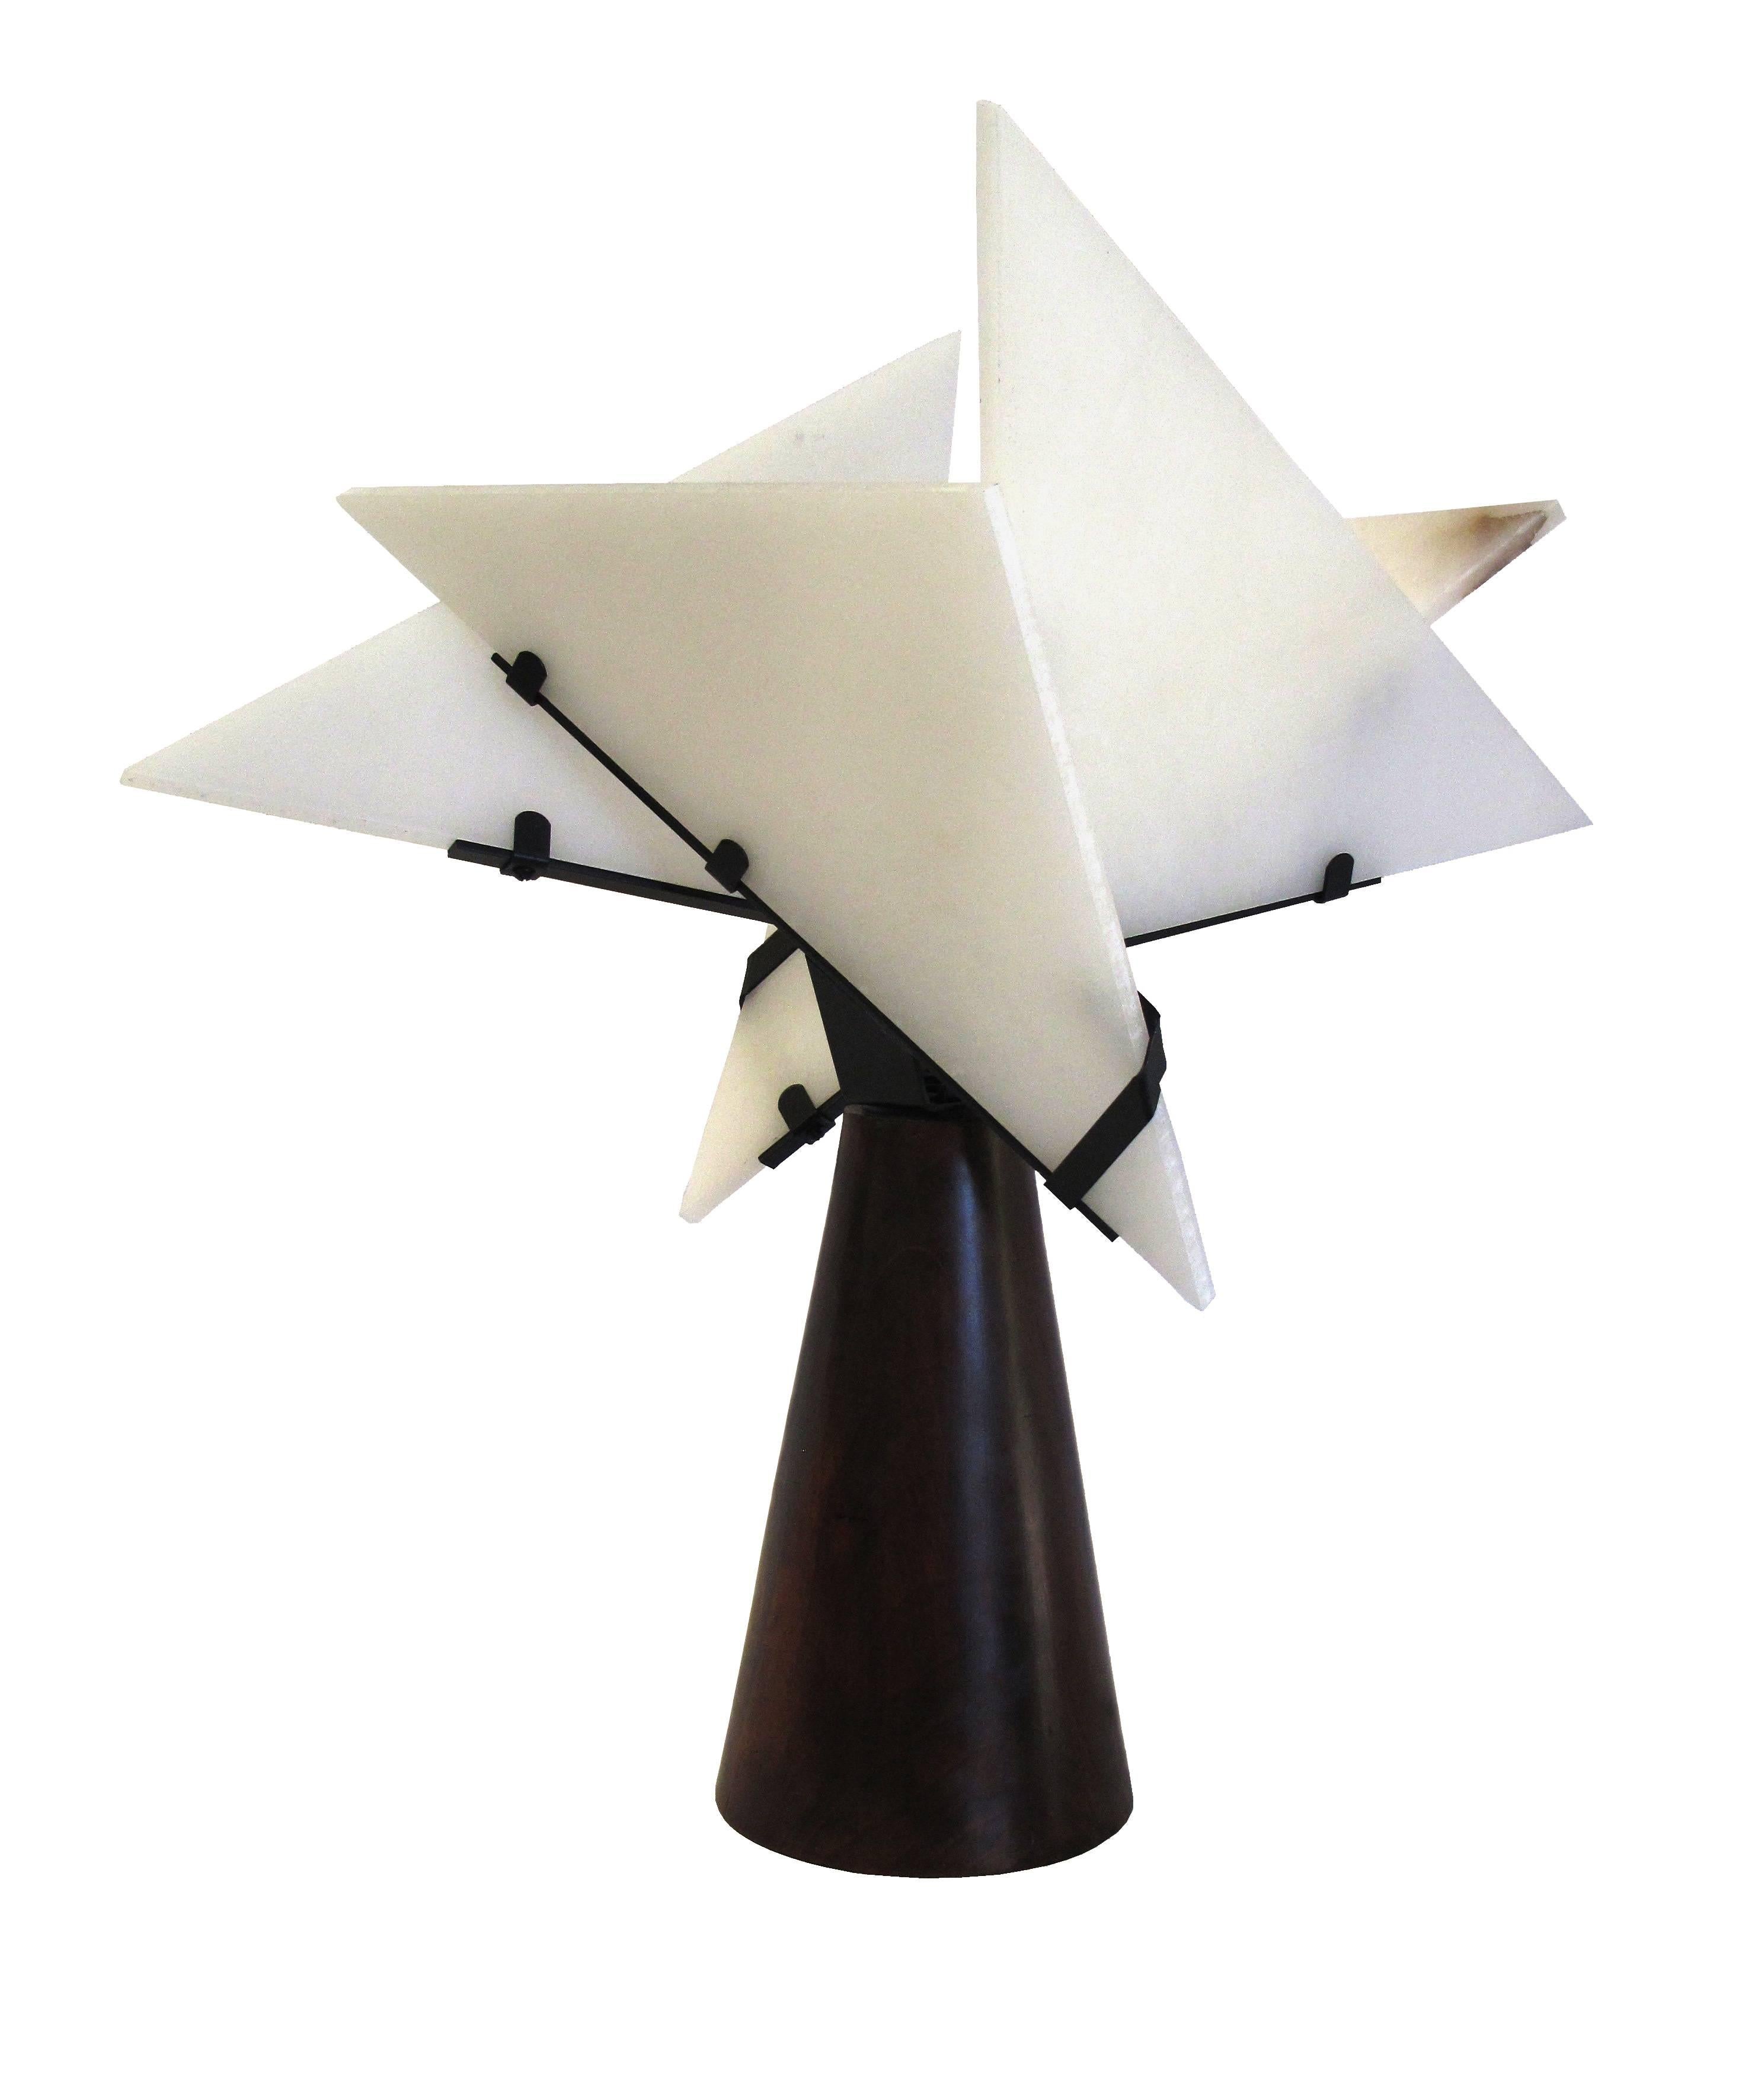 'Nun 1' table lamp in the Manner of Pierre Chareau. Handcrafted in Los Angeles in the workshop of noted French designer and antiques dealer Denis de le Mesiere, who meticulously pays homage to the work of Pierre Chareau with scrupulous attention to